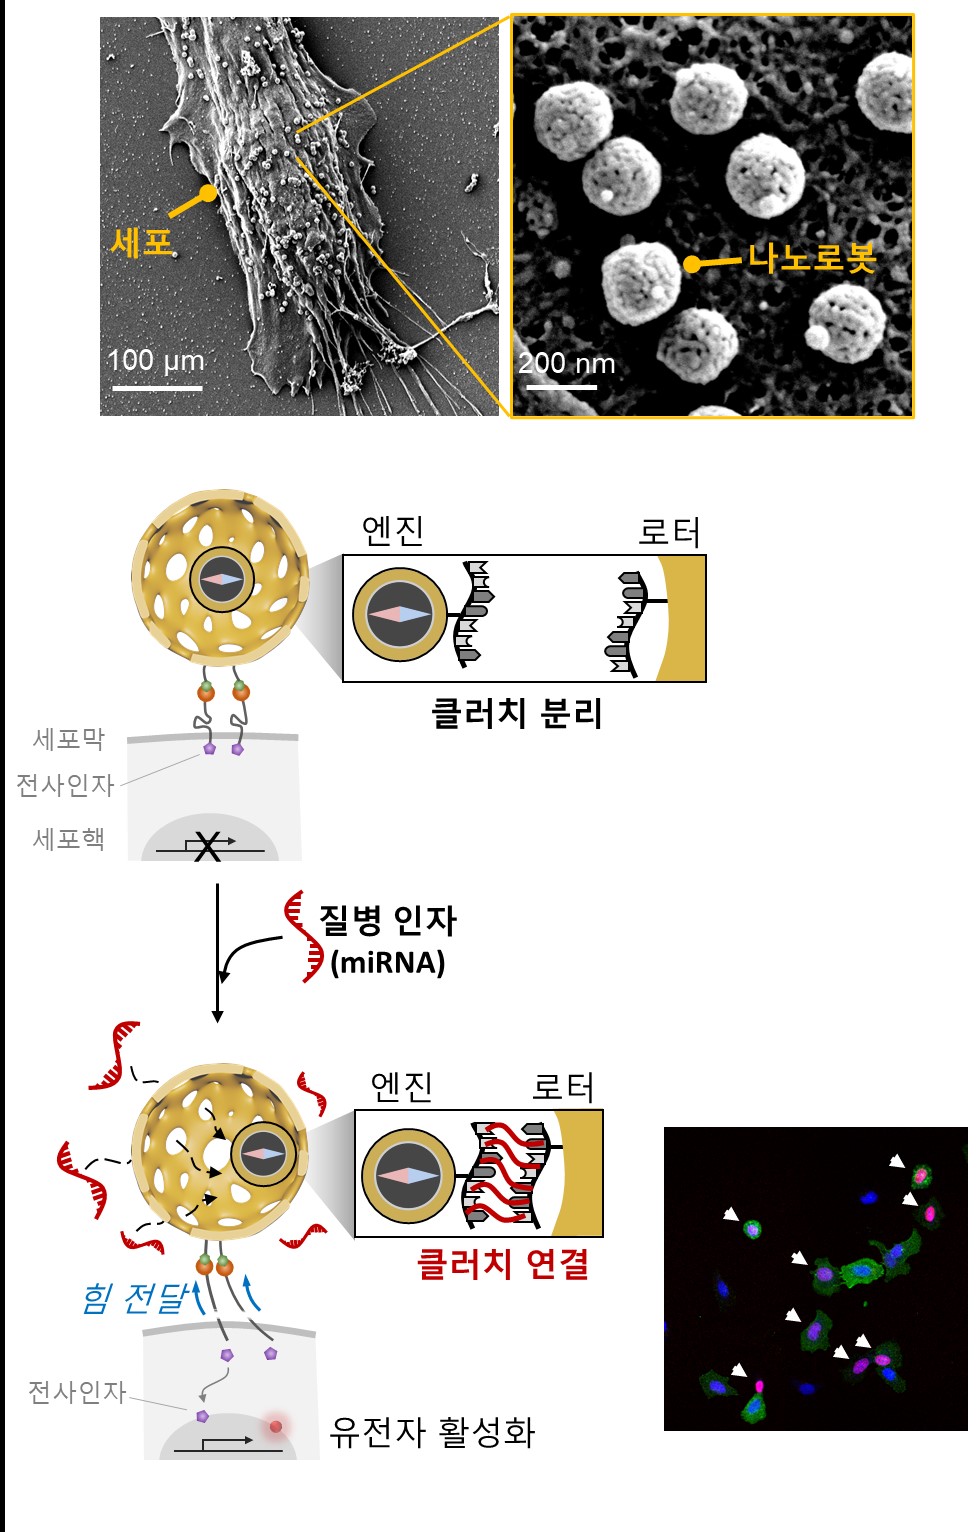 [Figure 4] Electron microscopy image of clutch nanorobot bound to cells. (Bottom) In the presence of disease factors, the clutch nanorobot generates force, inducing gene activation in cells (activated cells are shown in red fluorescence).